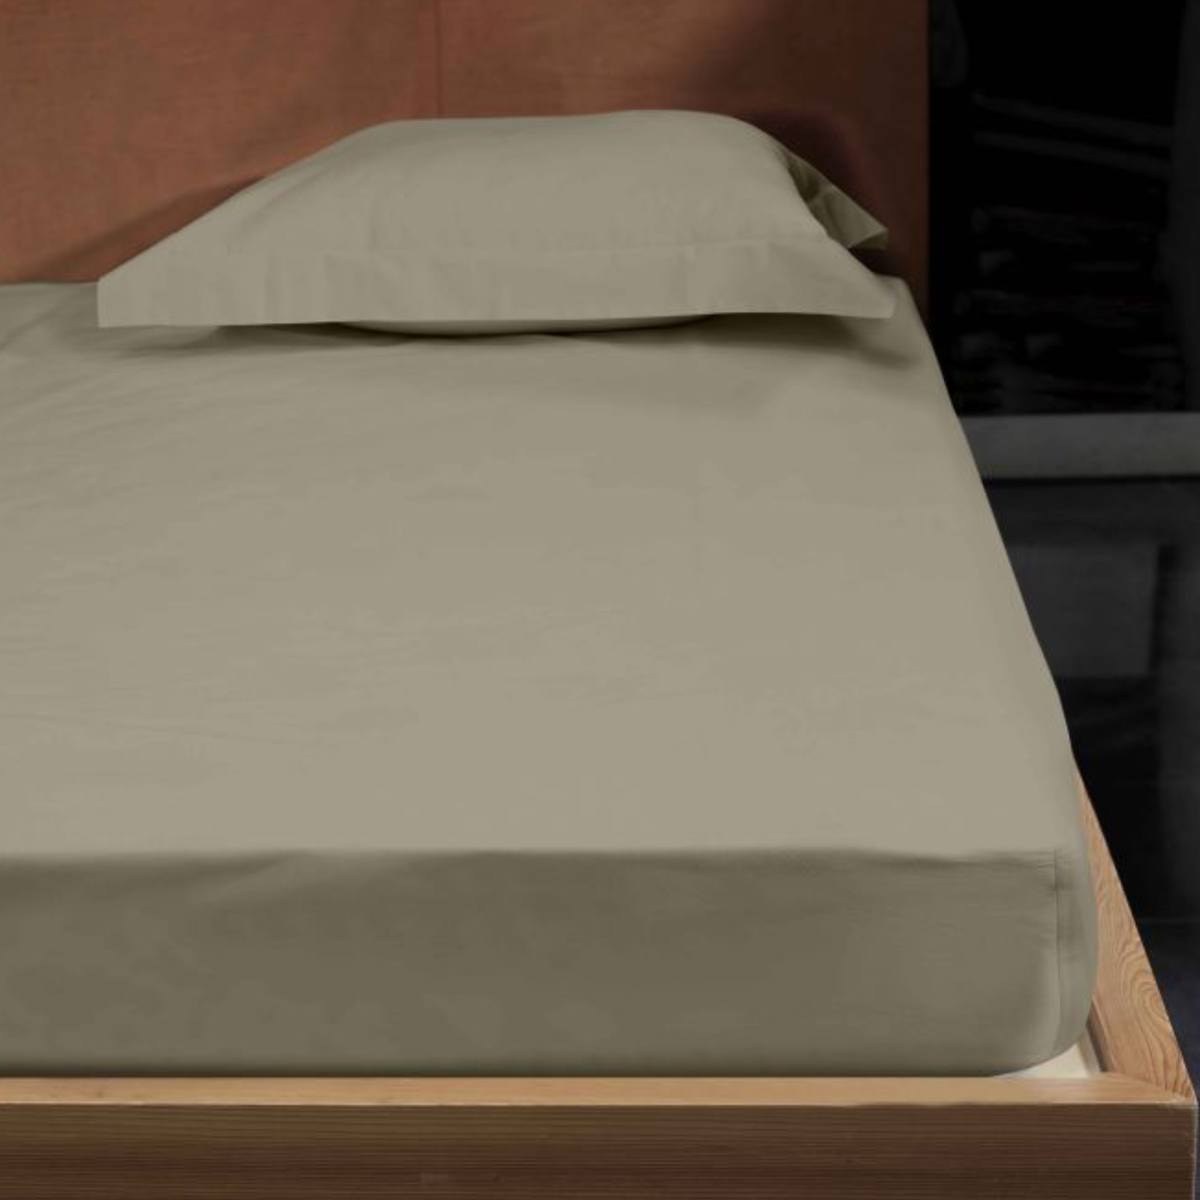 Fitted Bed Sheet of Signoria Gemma Bedding in Khaki Color